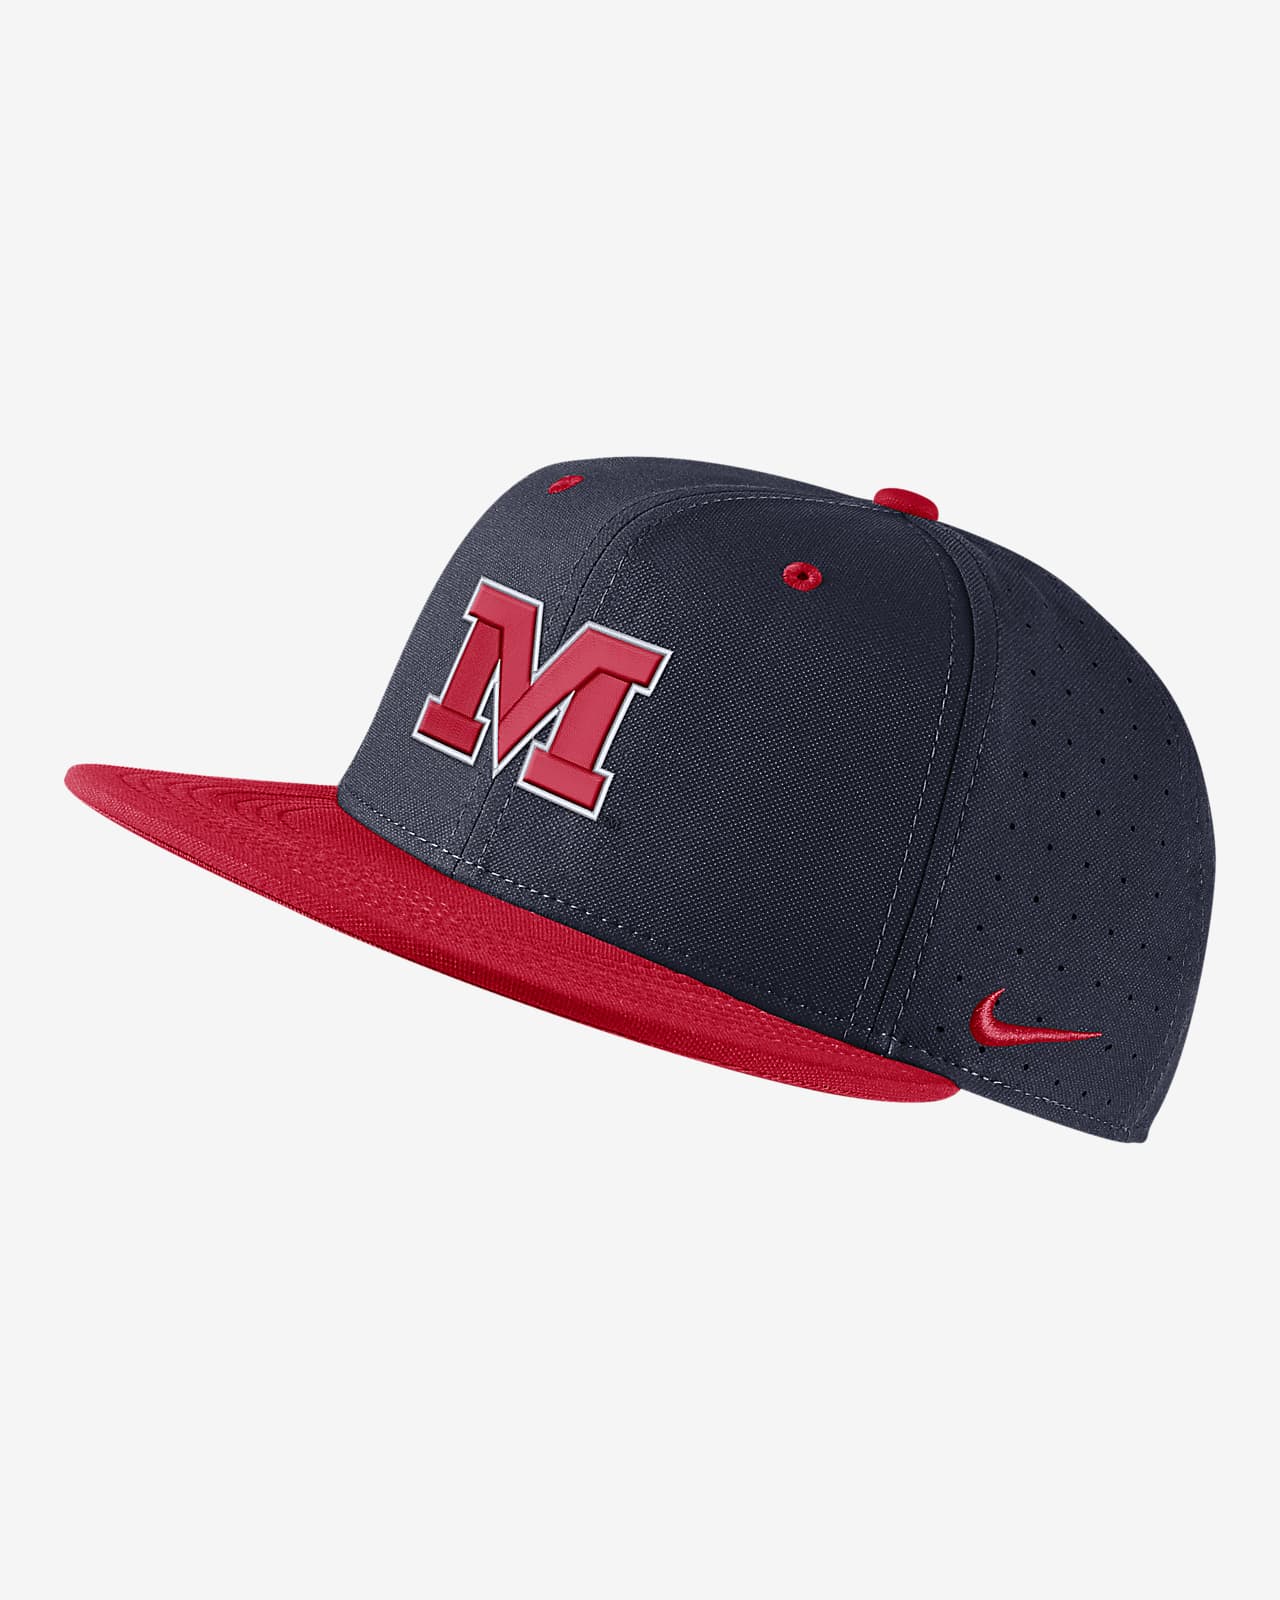 Ole Miss Nike College Fitted Baseball Hat